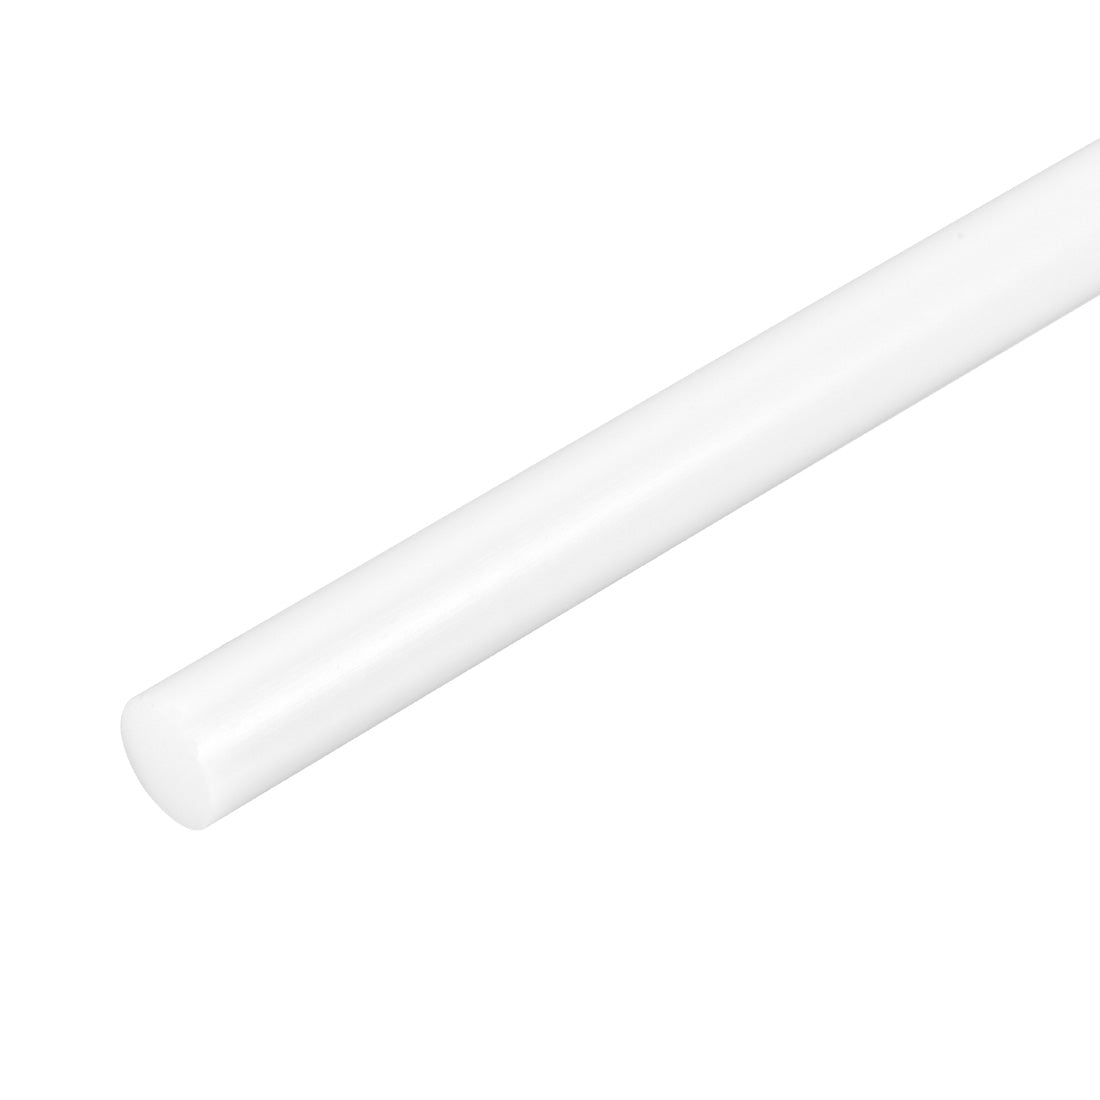 uxcell Uxcell Plastic Round Rod,12.5mm Dia 50cm White Engineering Plastic Round Bar